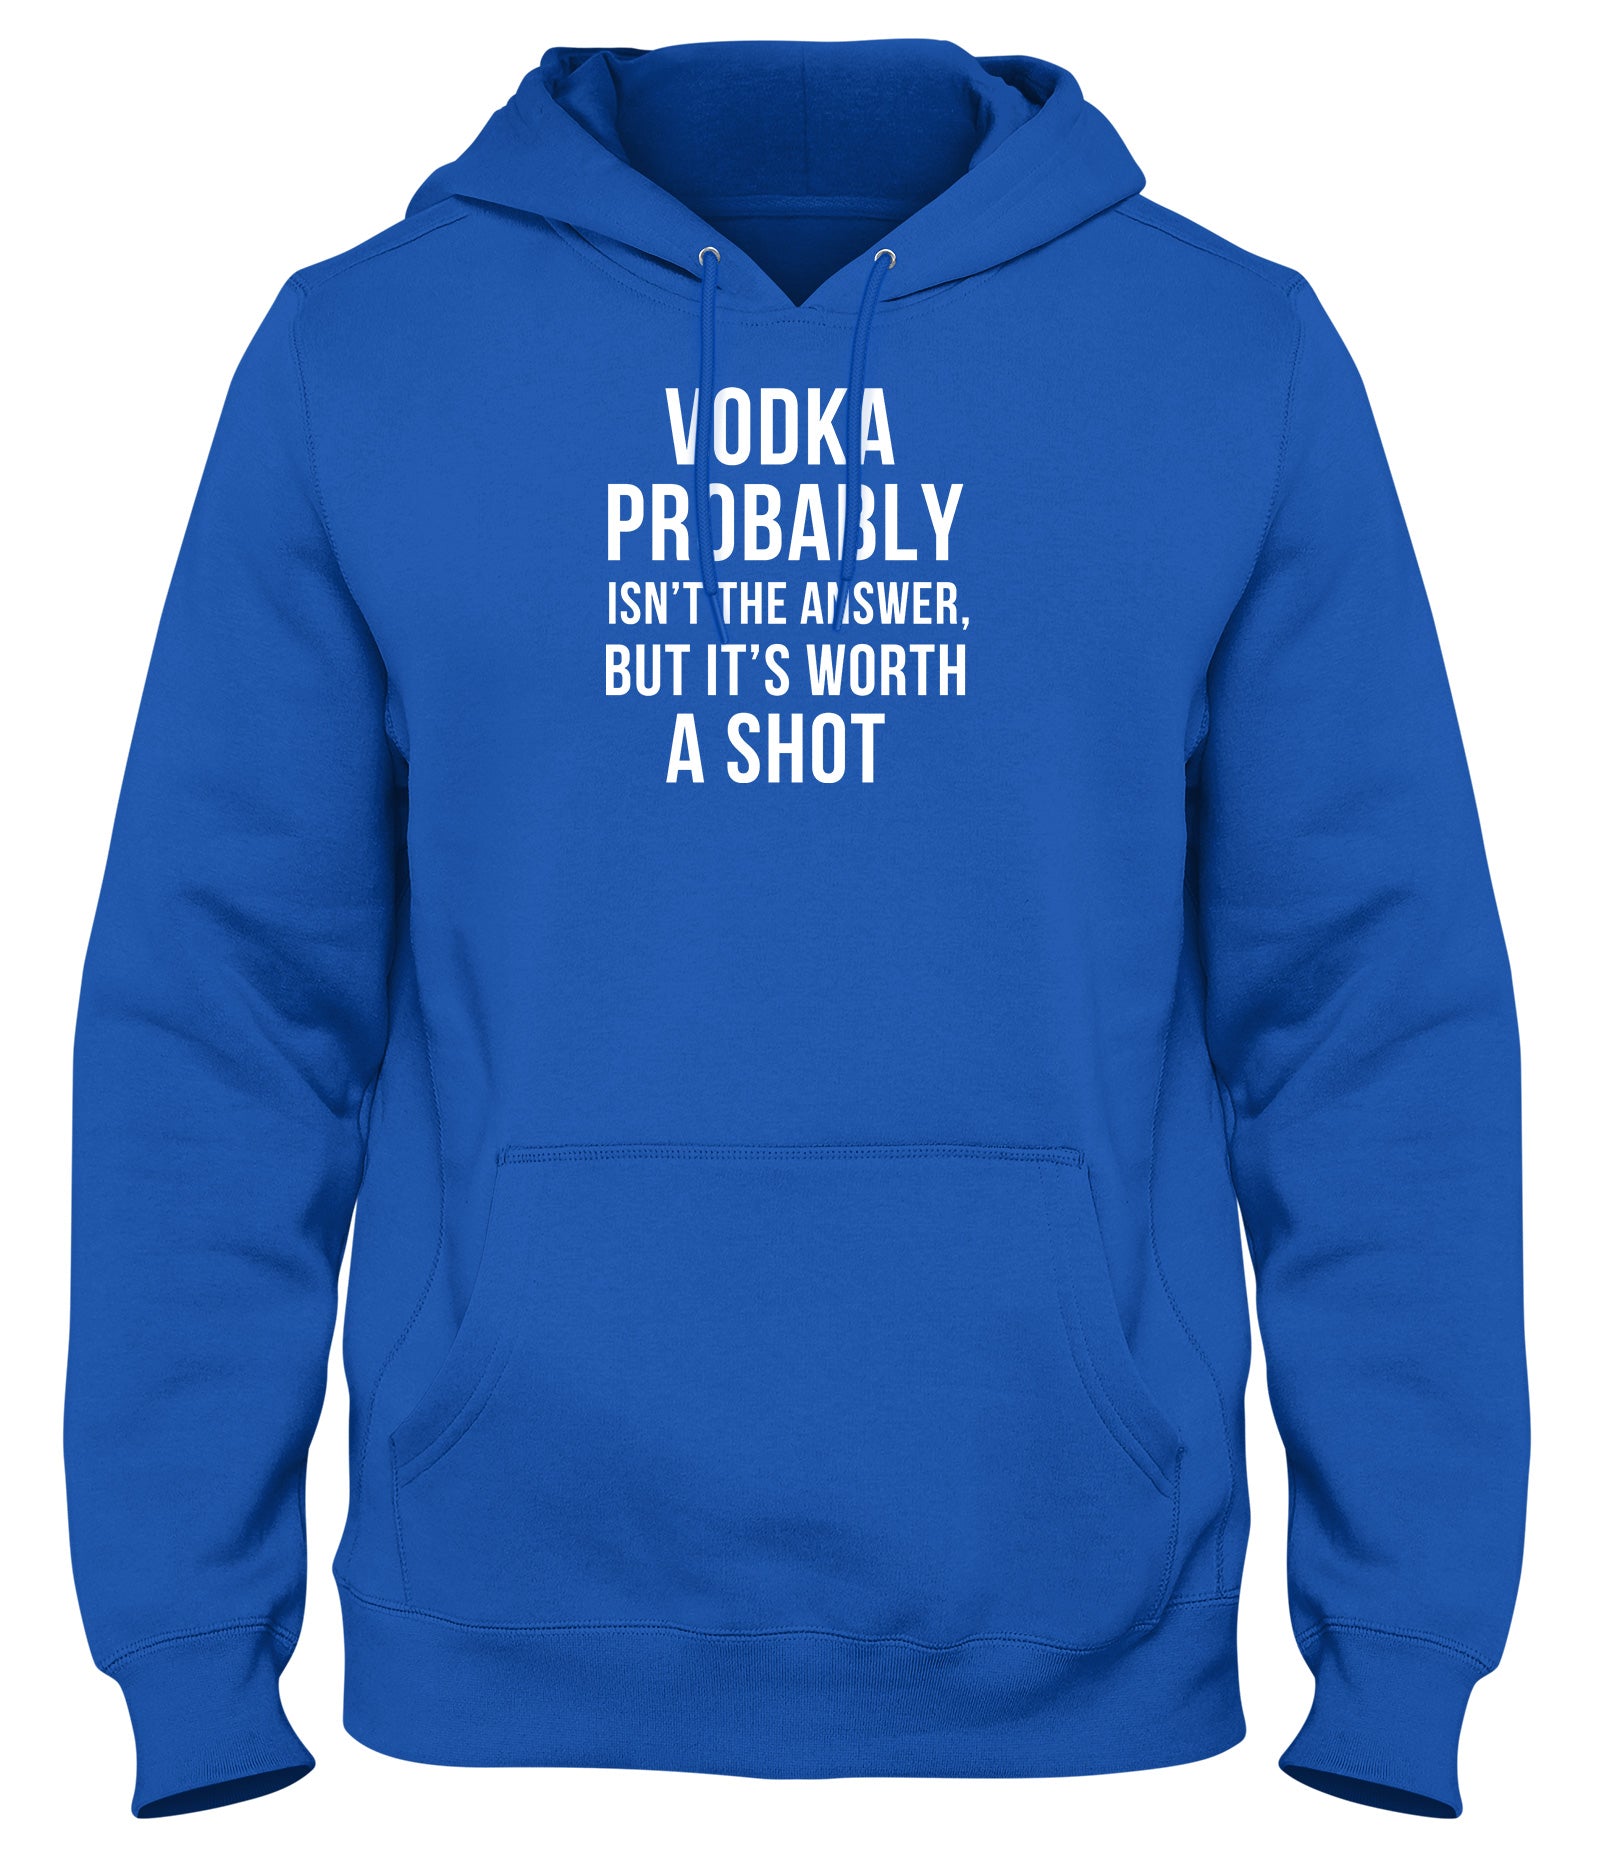 VODKA PROBABLY ISN'T THE ANSWER BUT IT'S WORTH A SHOT MENS WOMENS UNISEX FUNNY HOODIE